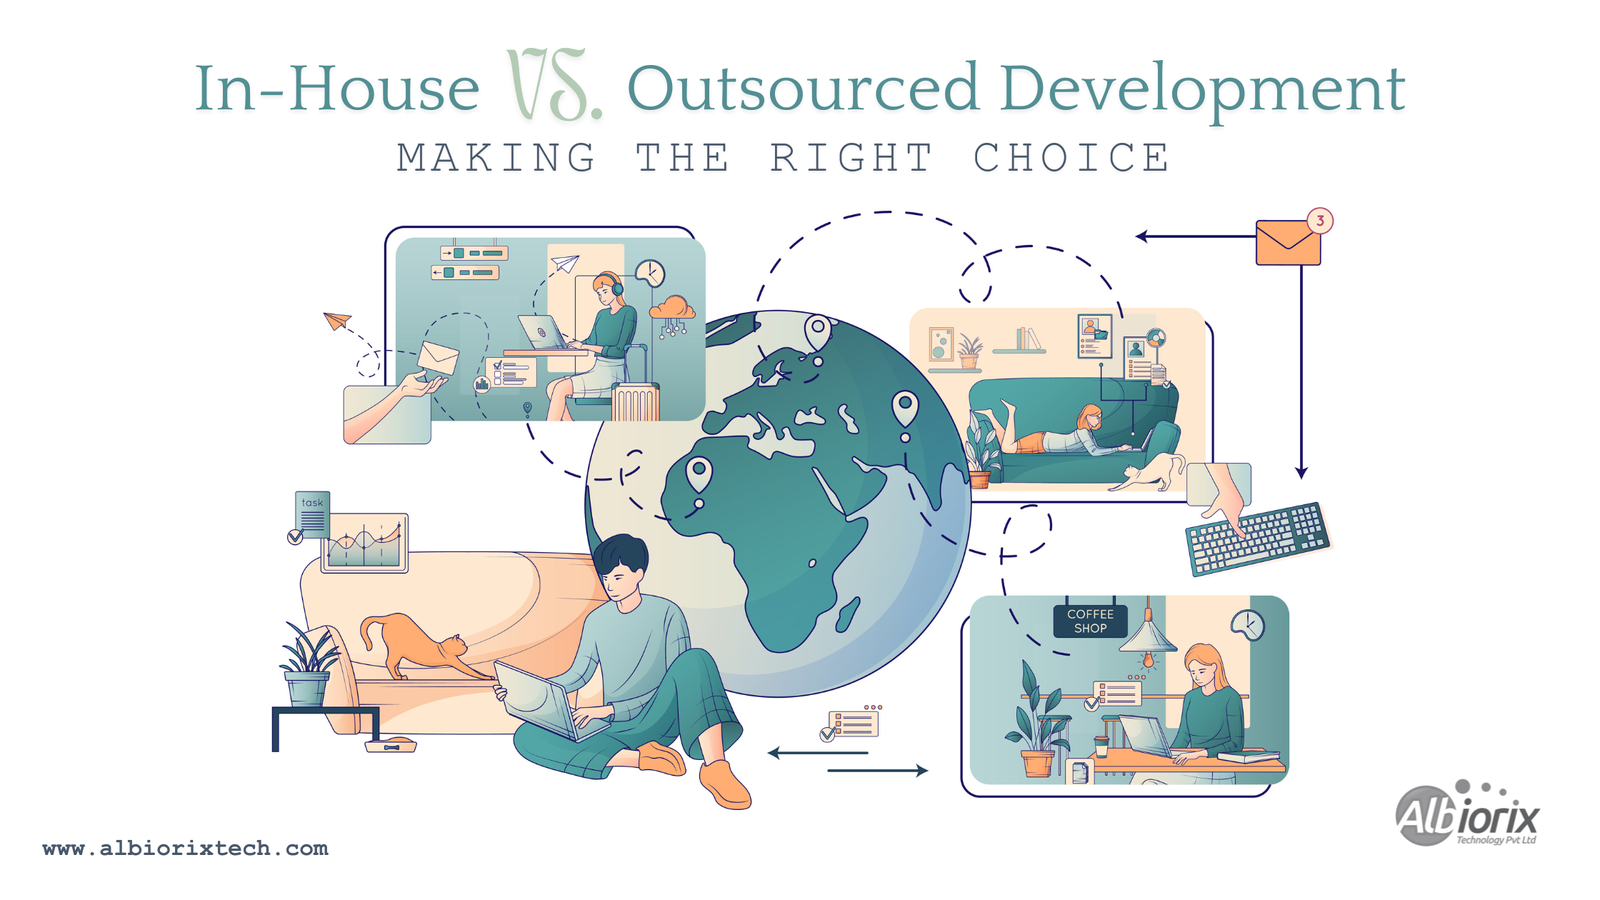 In-House vs. Outsourced Development: Making the Right Choice 